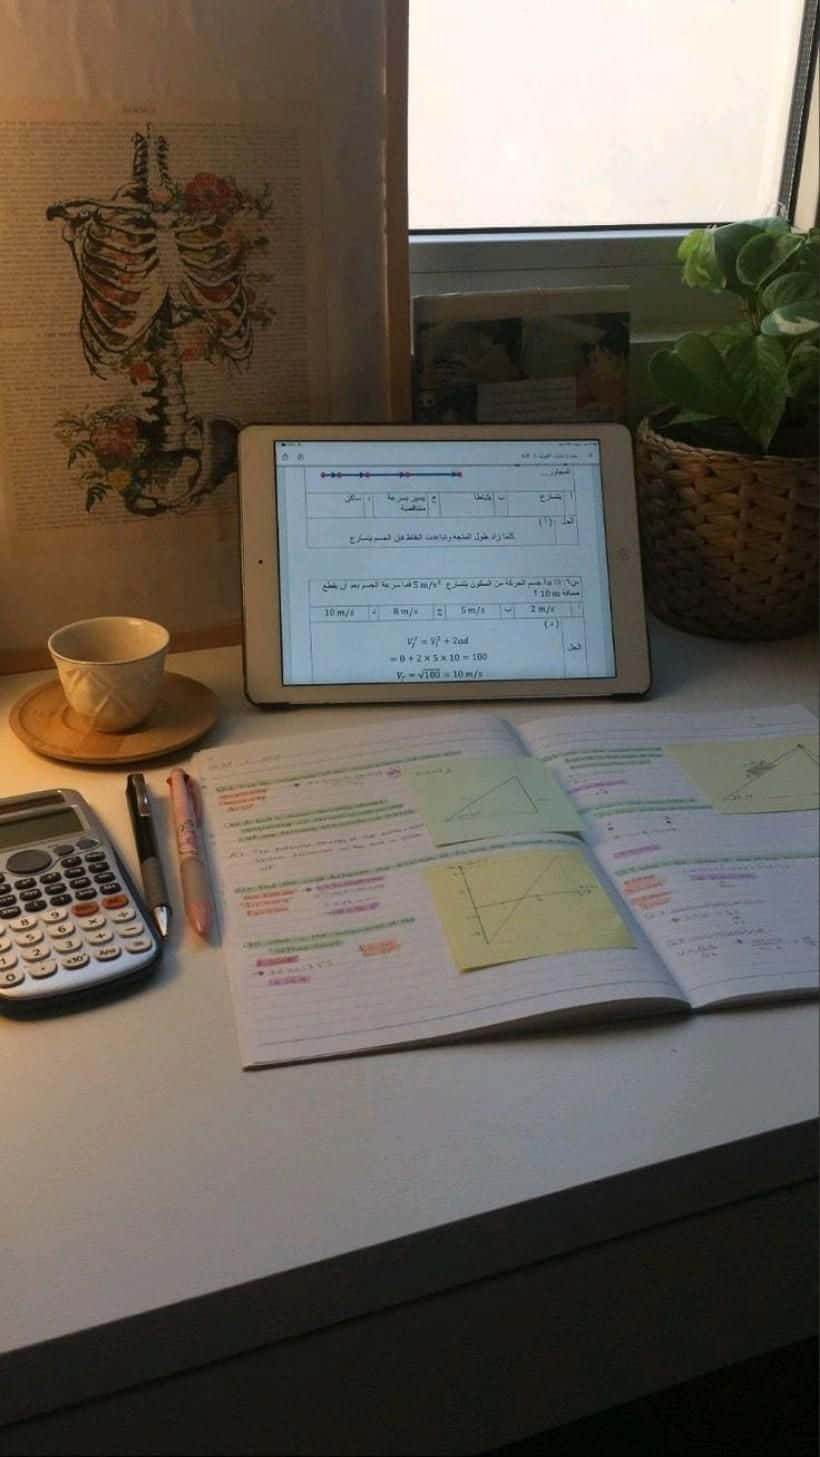 A Desk With A Calculator, Tablet, And A Plant